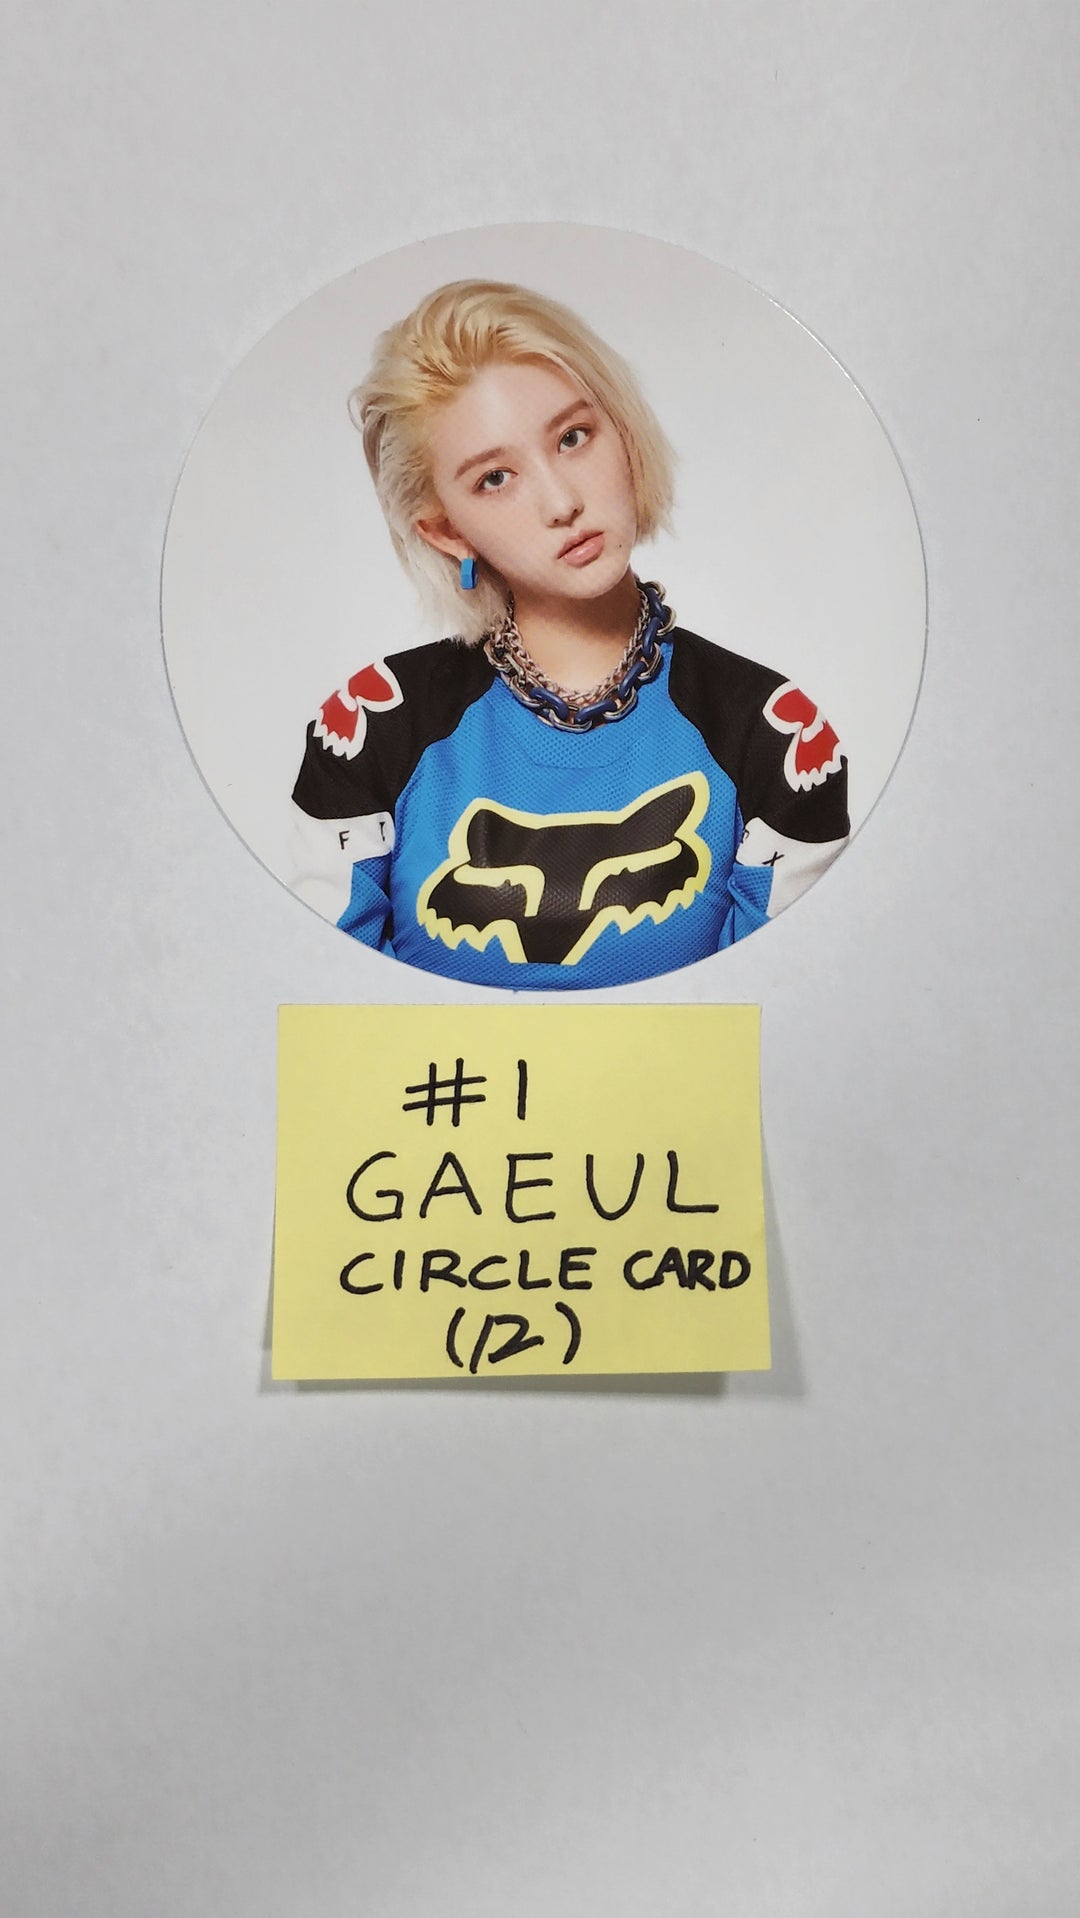 IVE 'After Like' - Official Photocard, Circle Card, Postcard